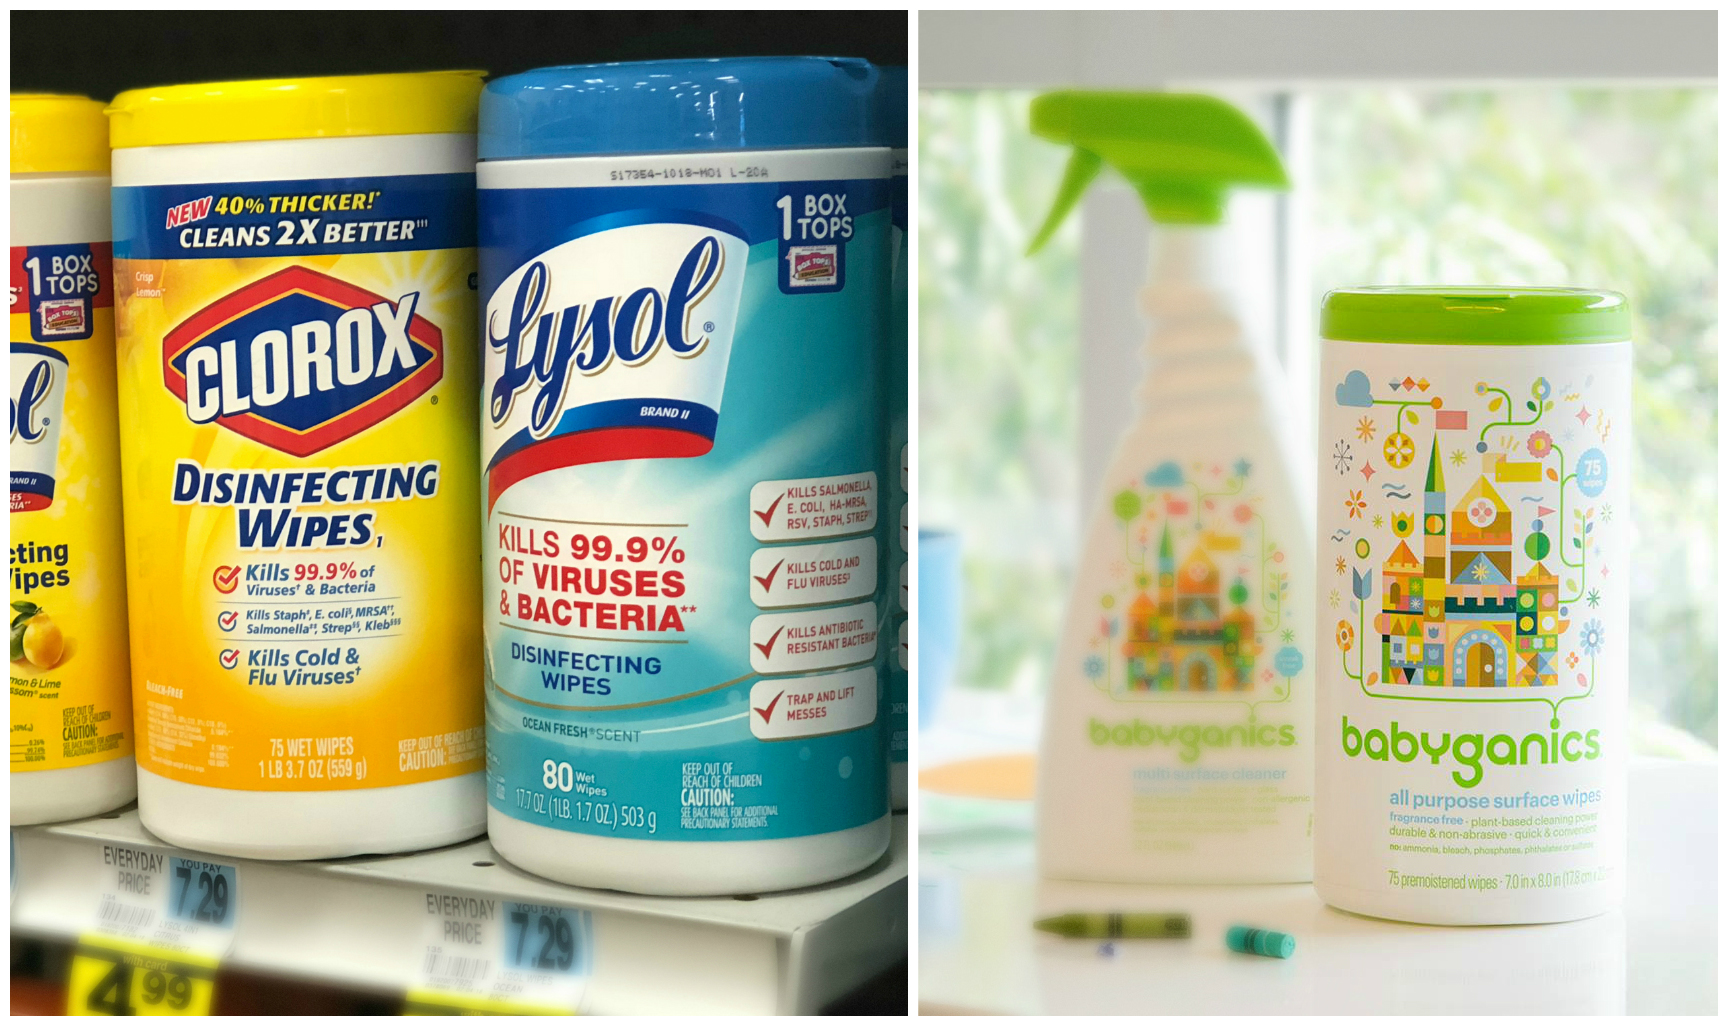 green natural eco-friendly cleaning products – Cleaning Wipes comparison - Lysol versus babyganics